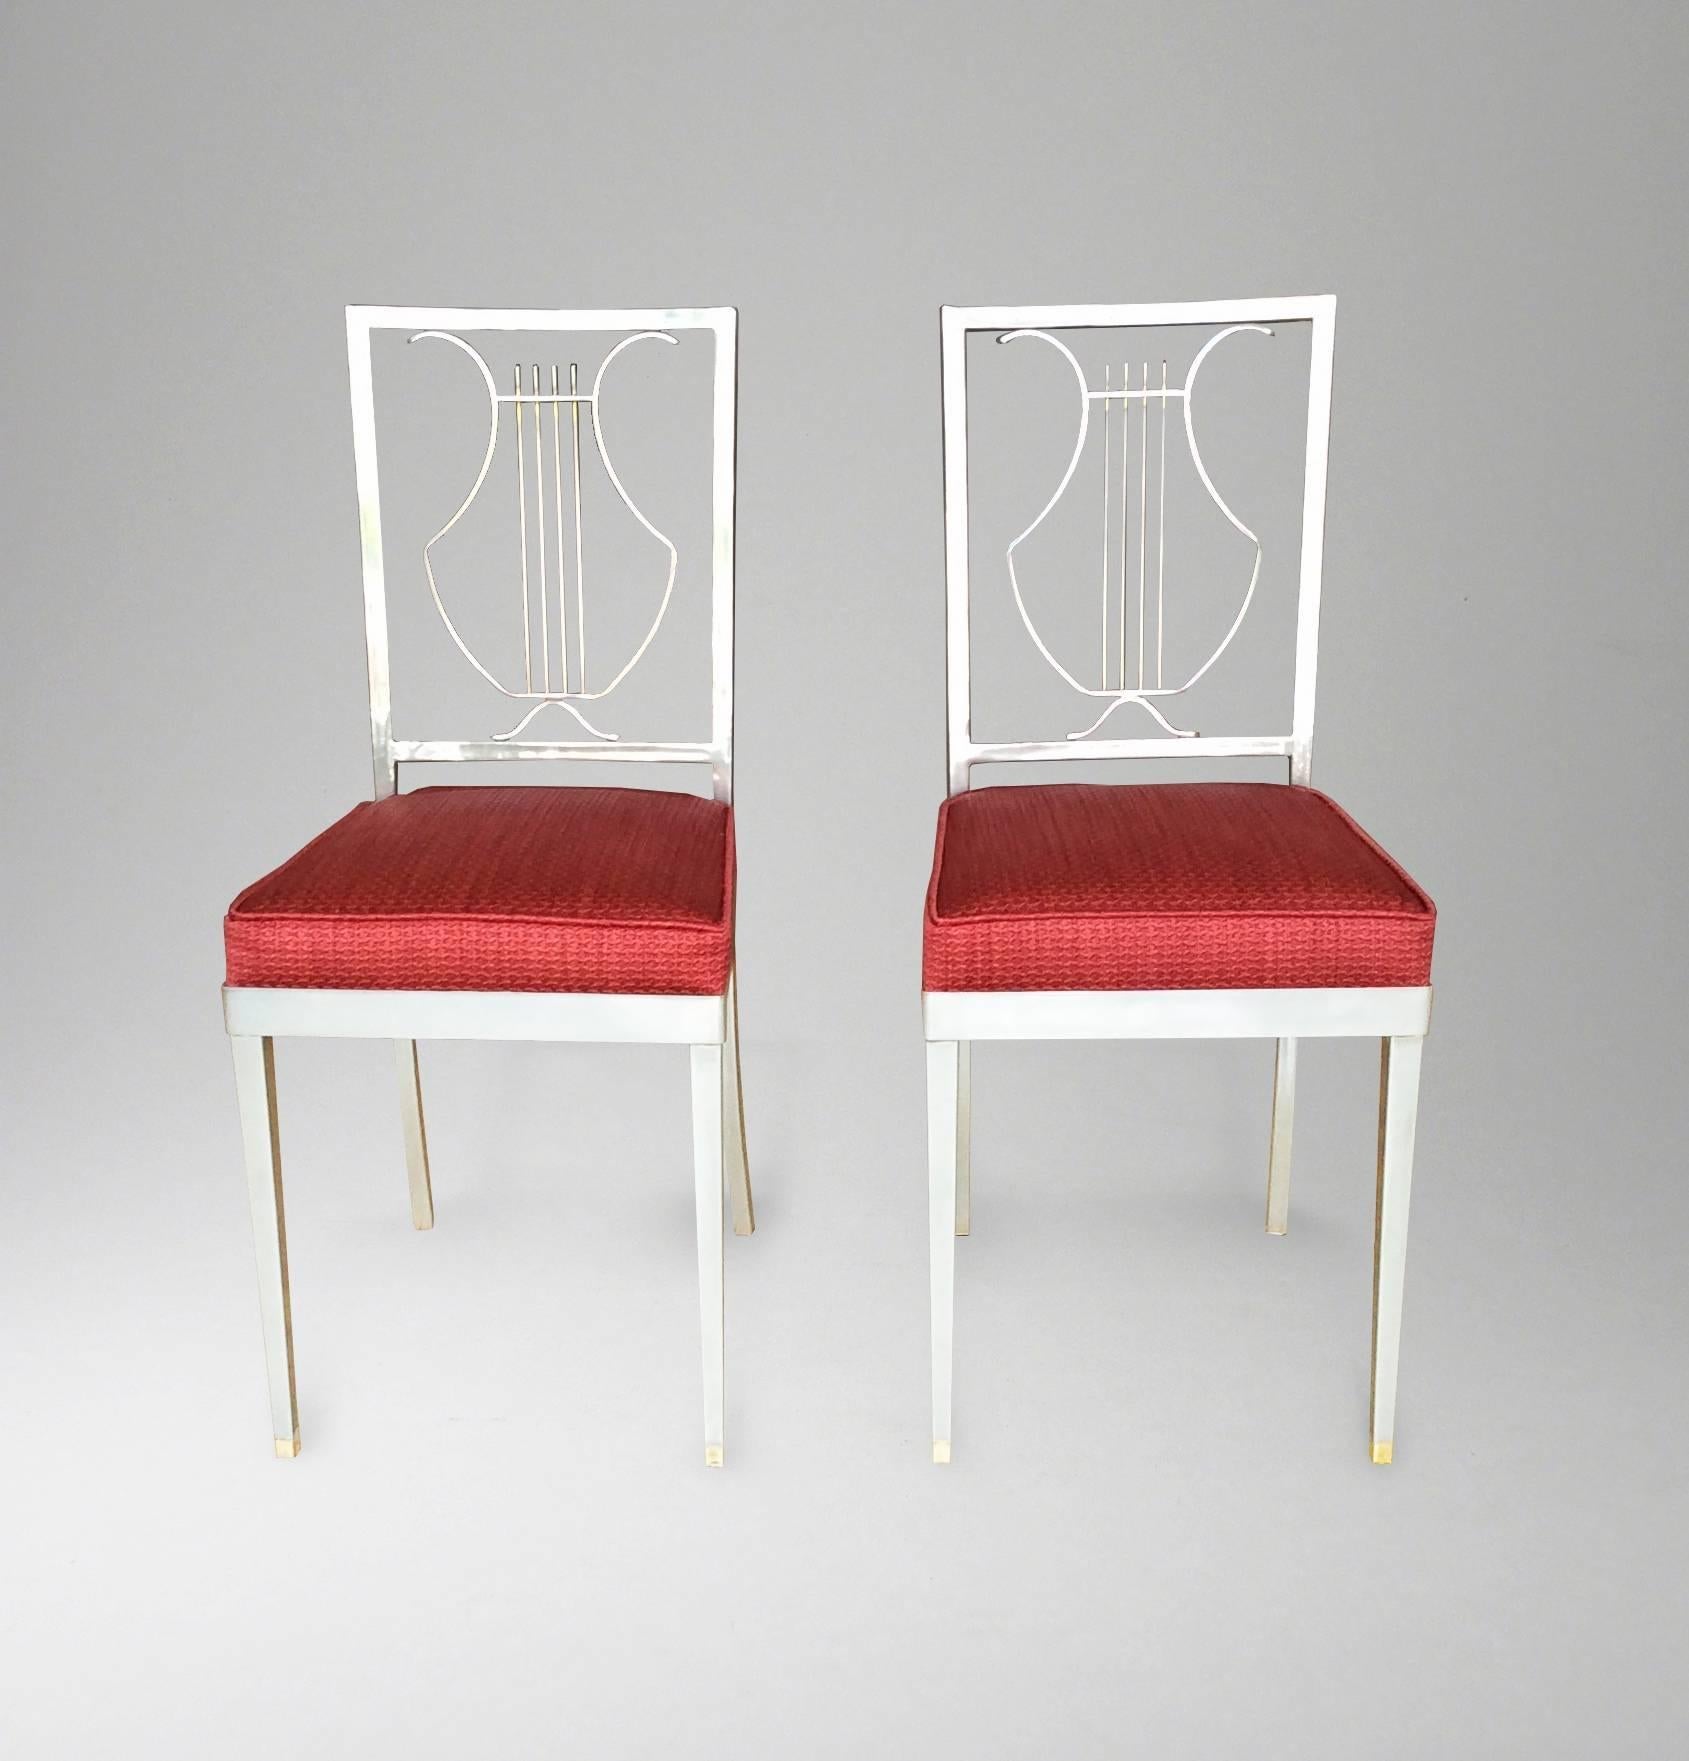 French, 1970s
Each in brushed metal finish, with stylized 'lyre' backrest
Seats re-upholstered in coral rust colored woven fabric.